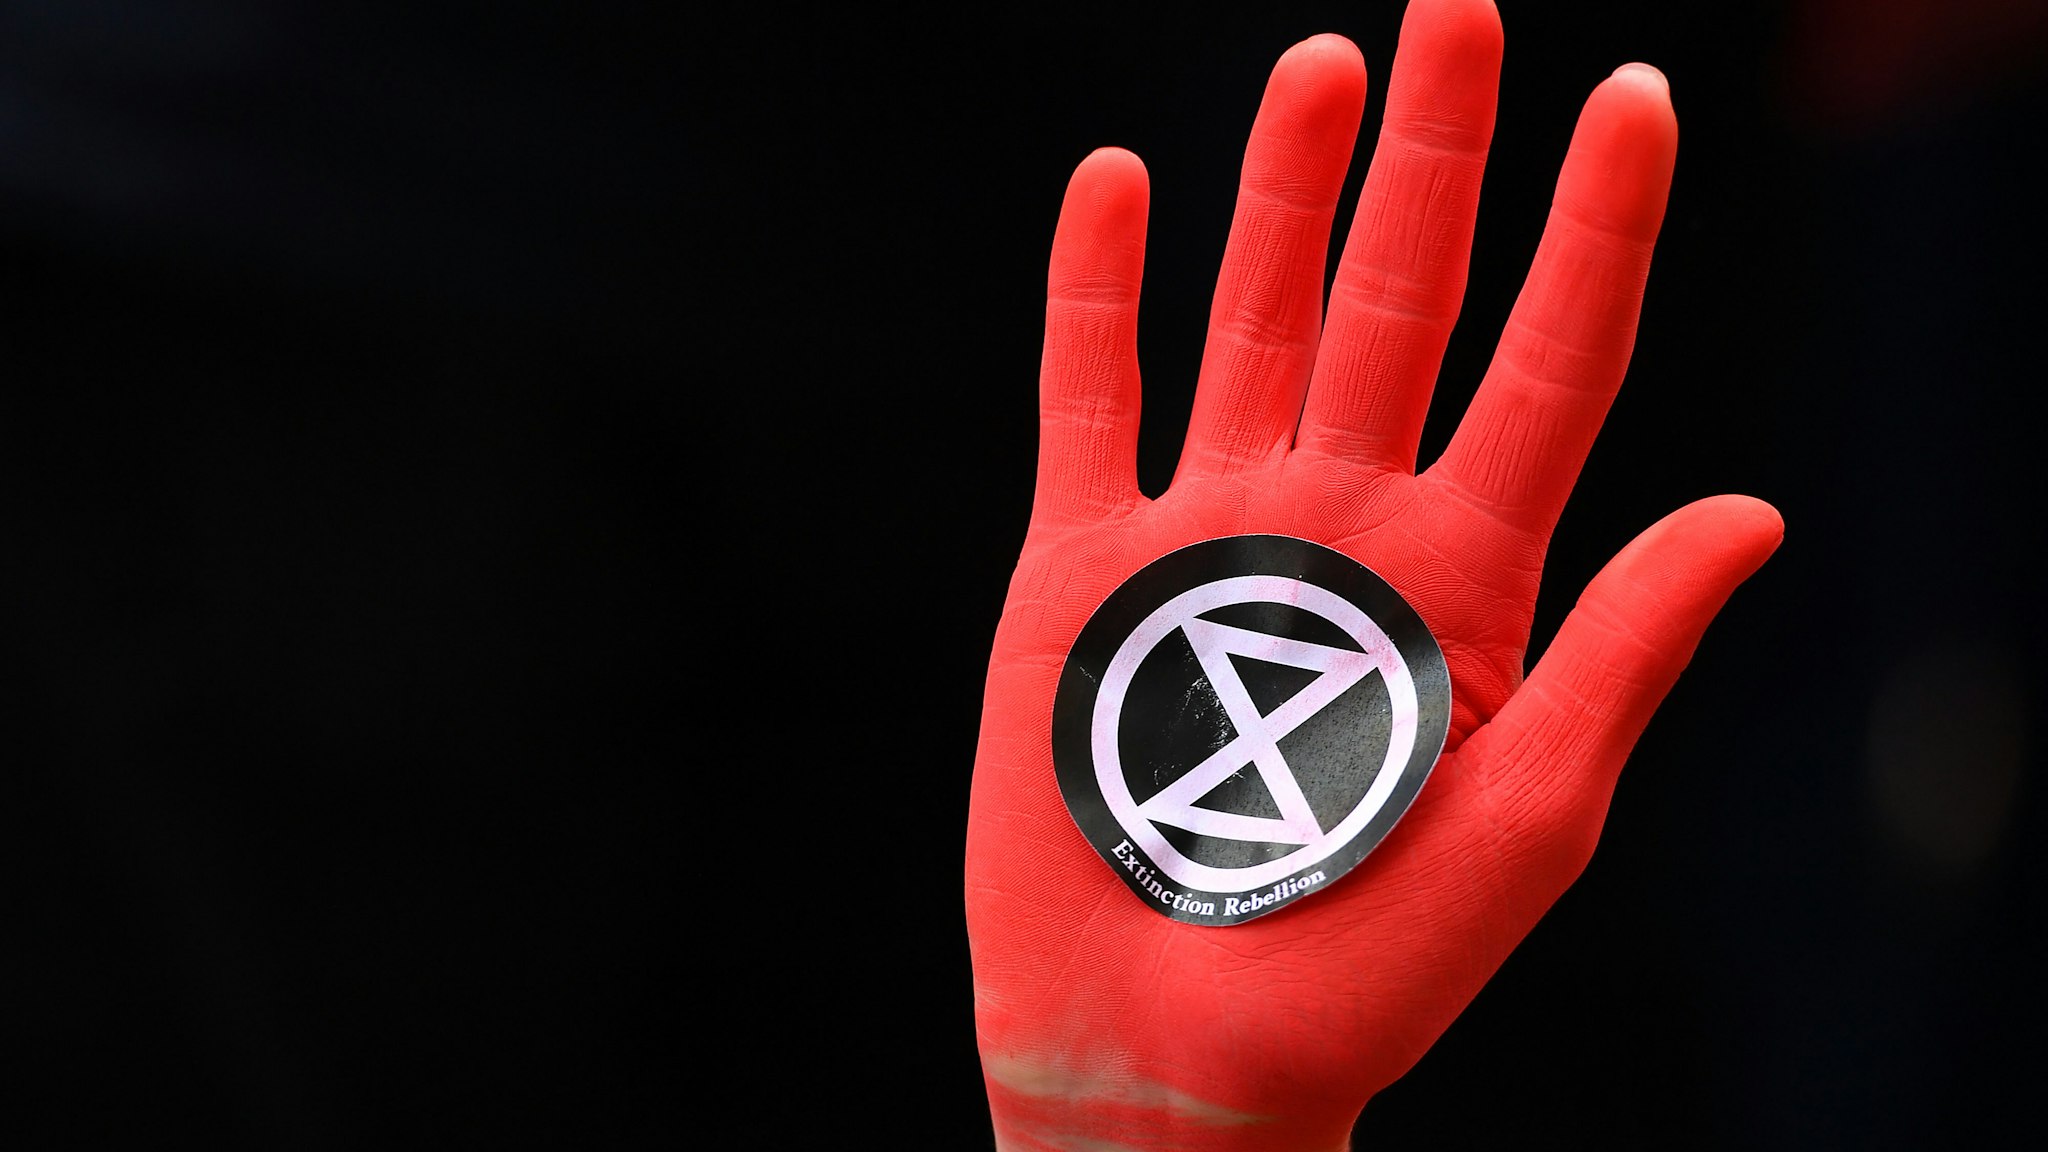 A protesters hand sprayed red in Westminster, London, during an Extinction Rebellion (XR) climate change protest. (Photo by Dominic Lipinski/PA Images via Getty Images)